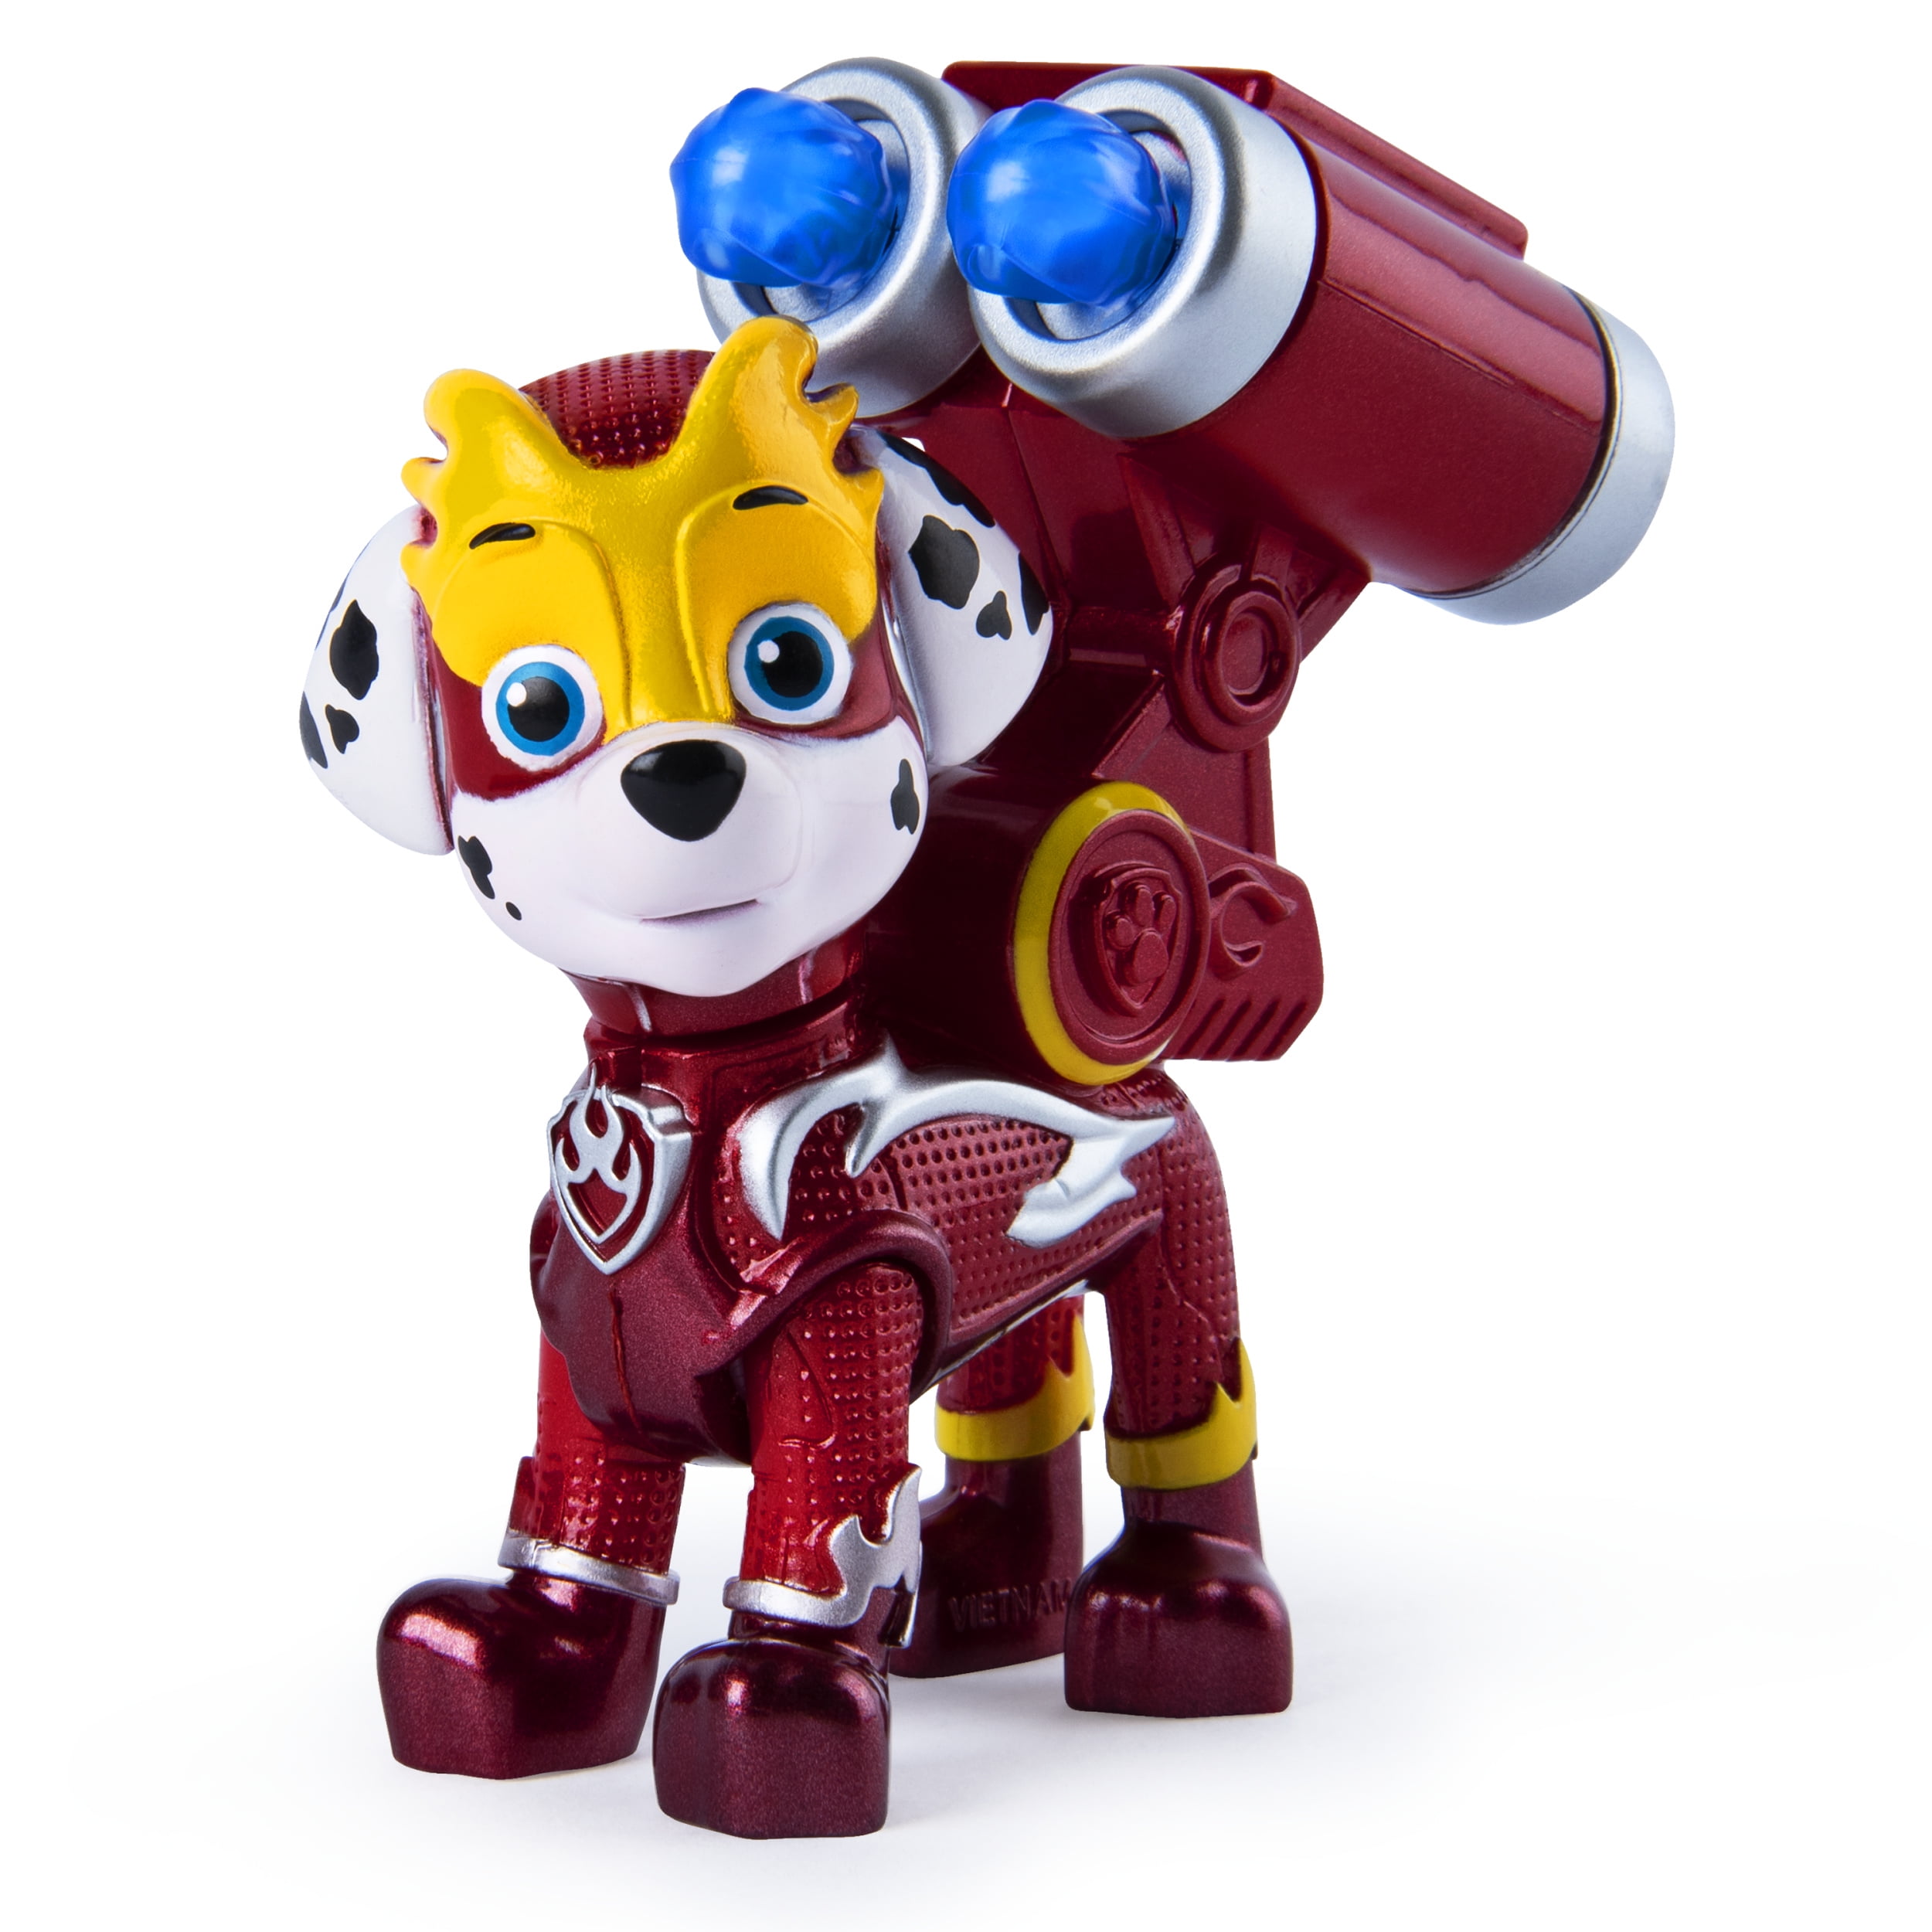 PAW Patrol, Mighty Pups Super Marshall with Transforming Backpack, for Kids Aged 3 and Up - Walmart.com